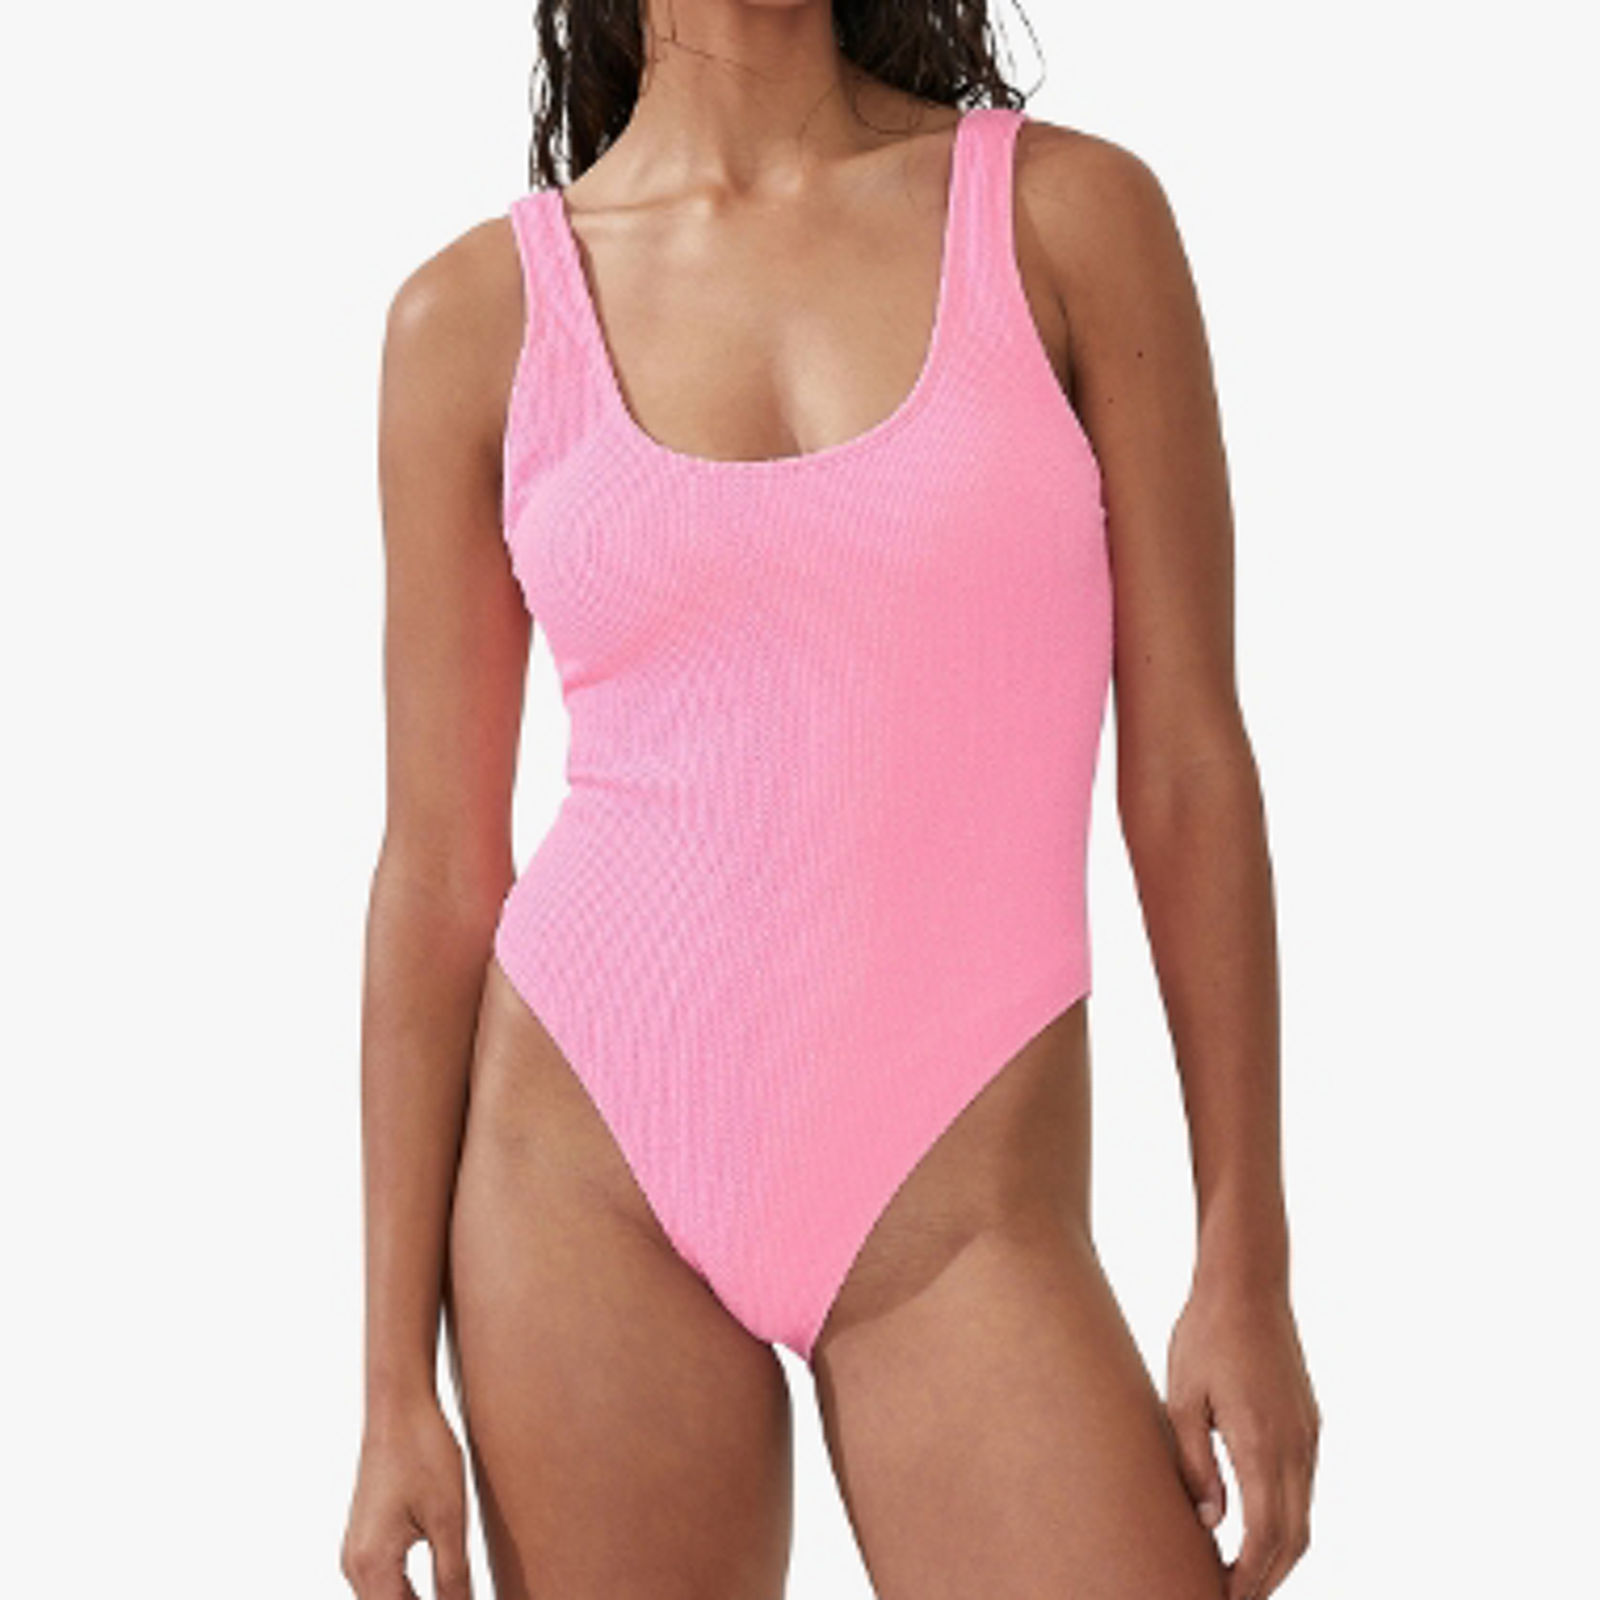 Full Bust Support Swimsuits for Women - Macy's